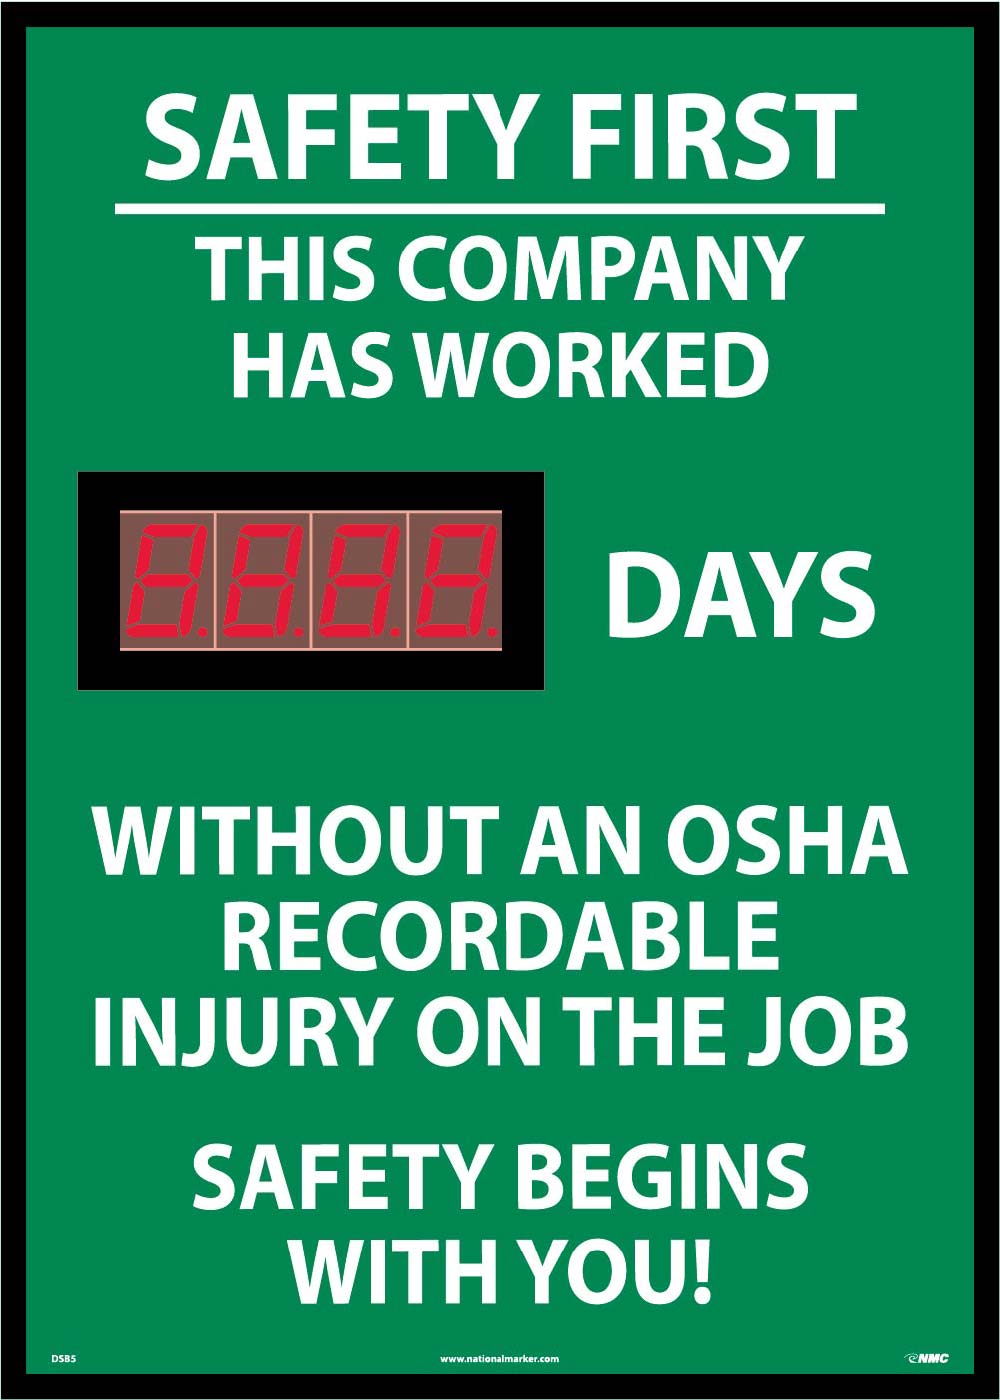 Safety First This Company Has Worked  Days Scoreboard-eSafety Supplies, Inc